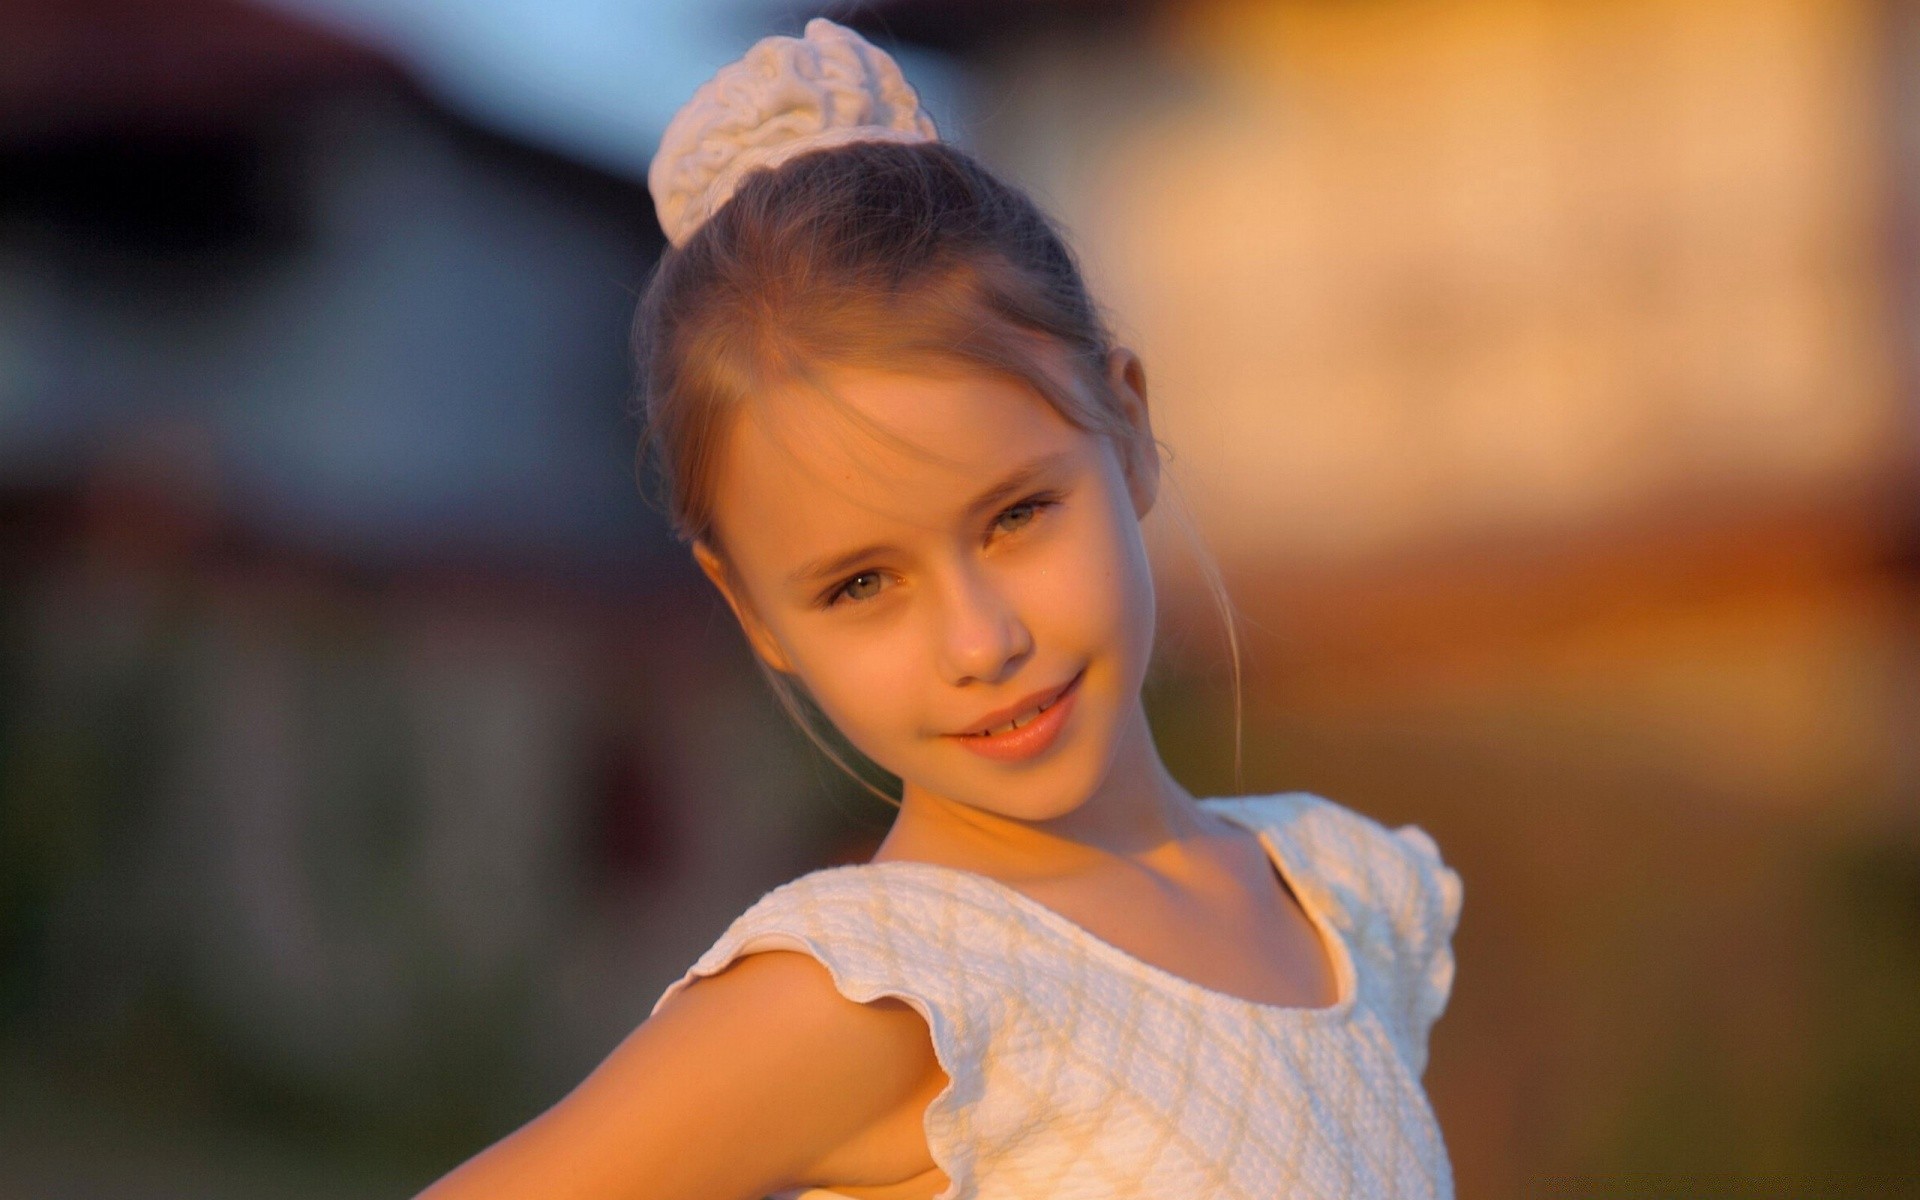 children one portrait wear adult happiness girl facial expression child outdoors woman blur daylight leisure